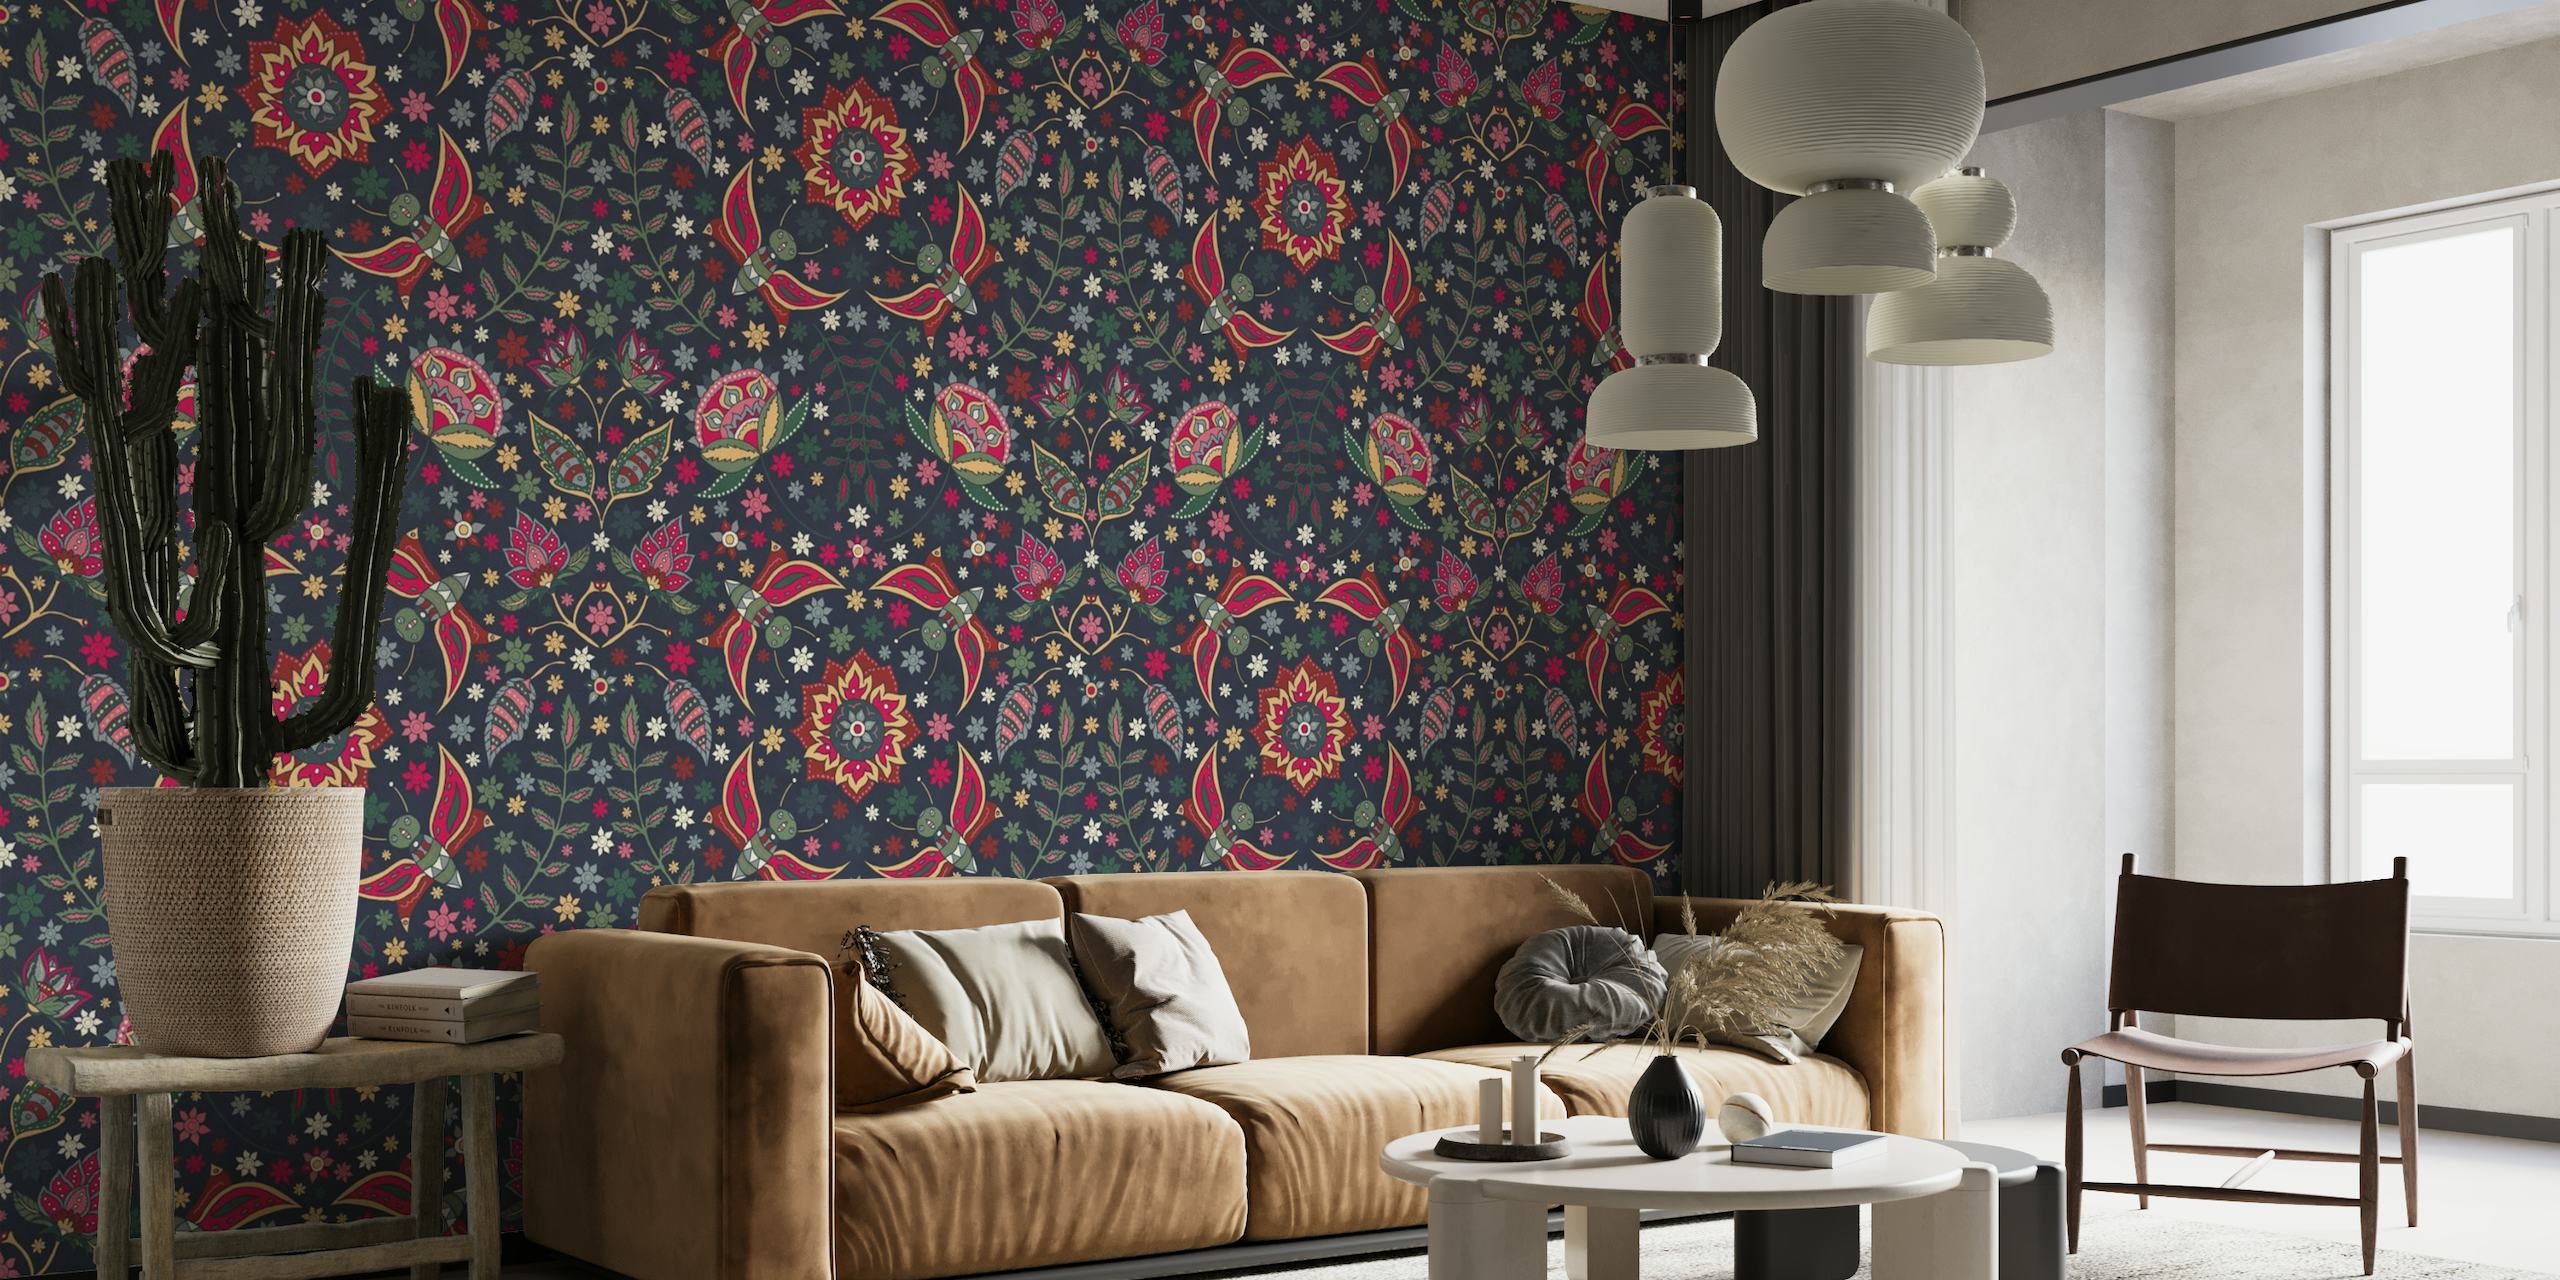 Colorful moth and floral pattern wall mural named 'The Moth Garden'